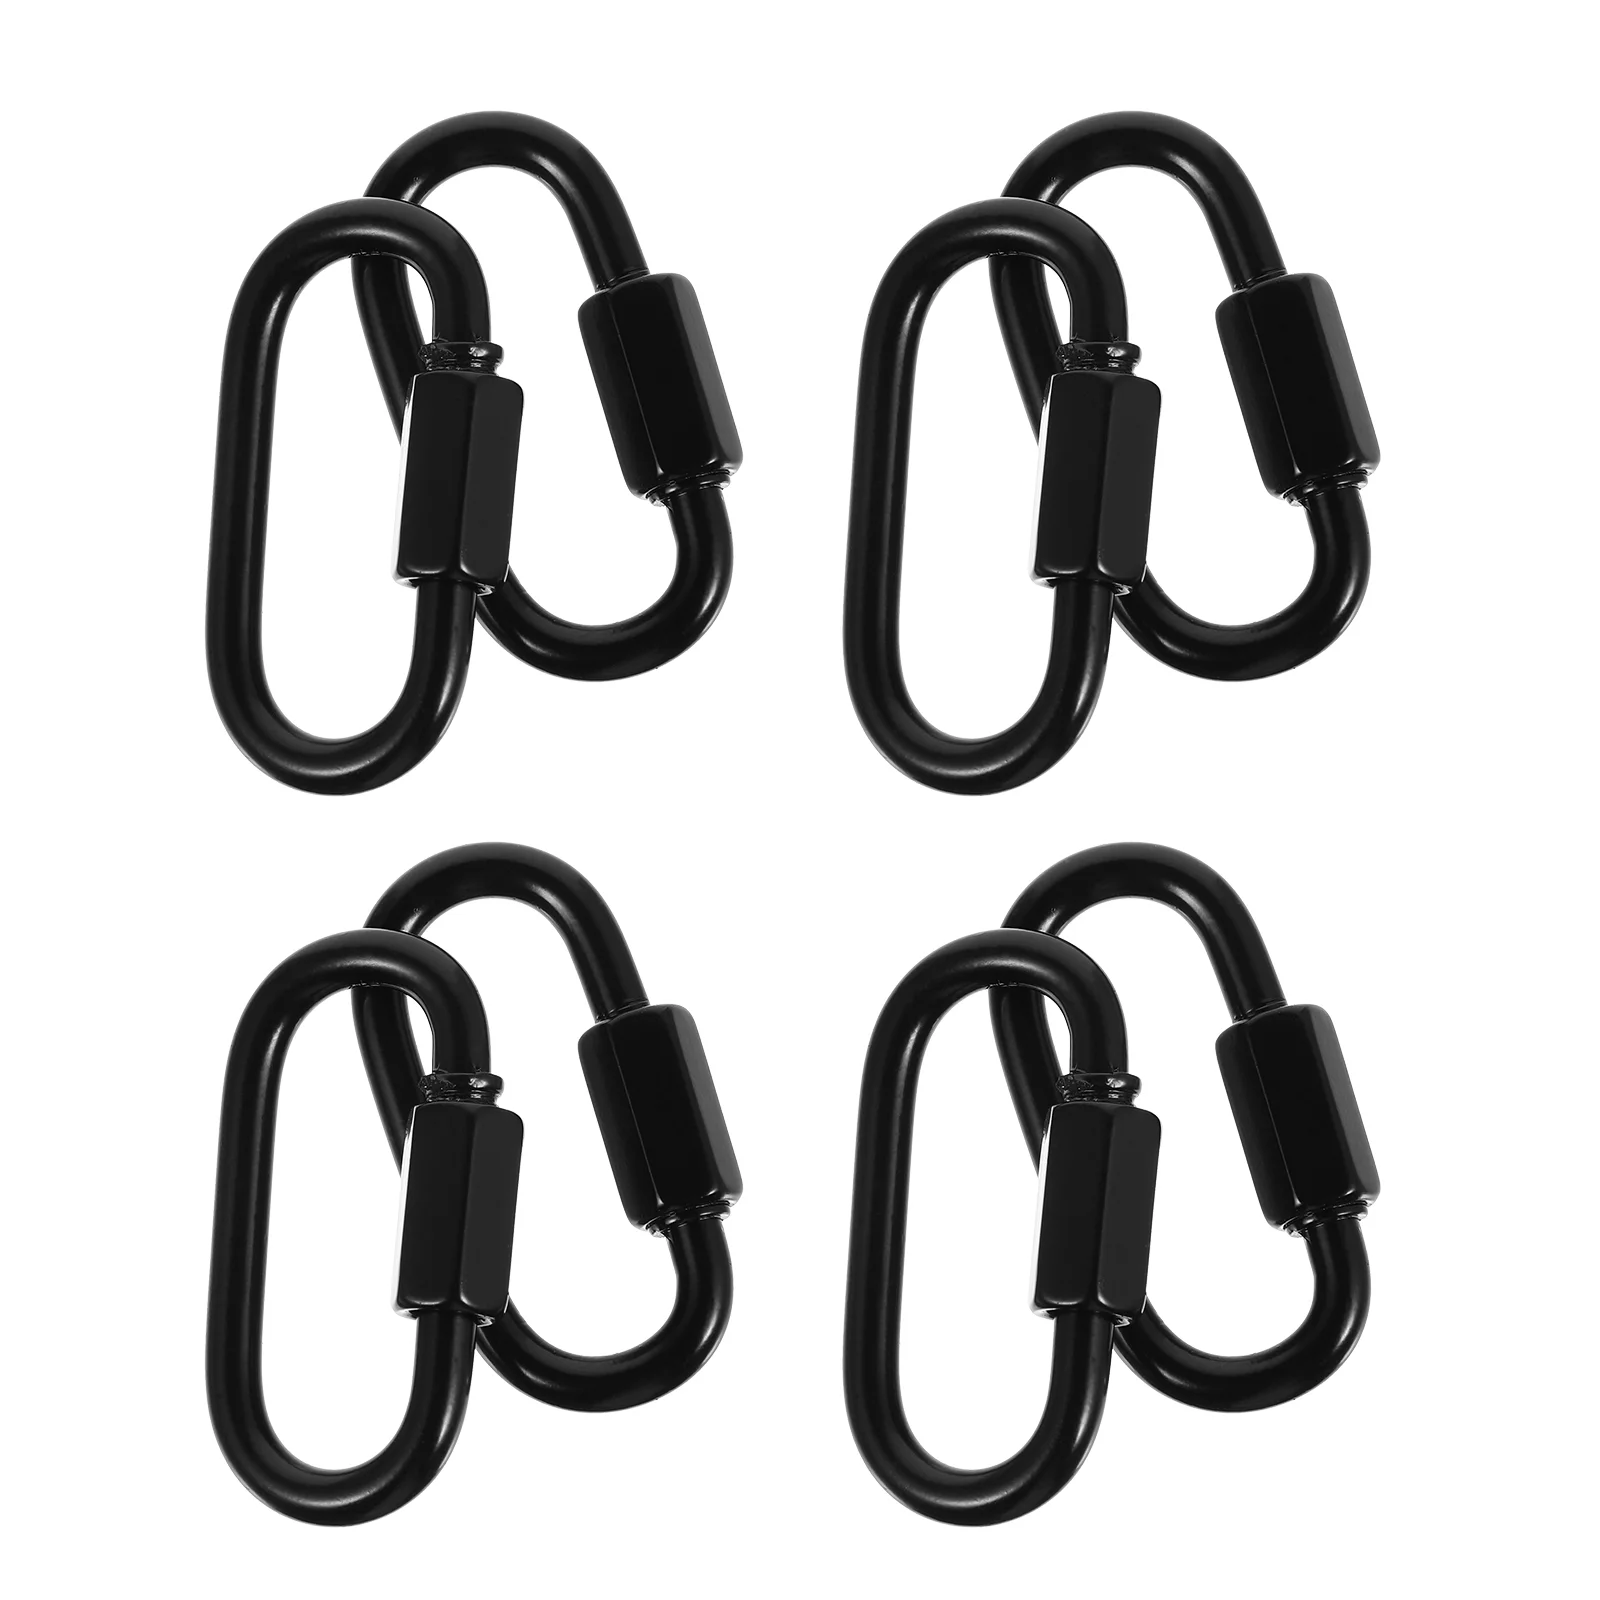 8 Pcs Carabiner Lifting Hooks Rope Quick Link Connector Chain Links Spring Trailer Connectors Safety Locking Iron